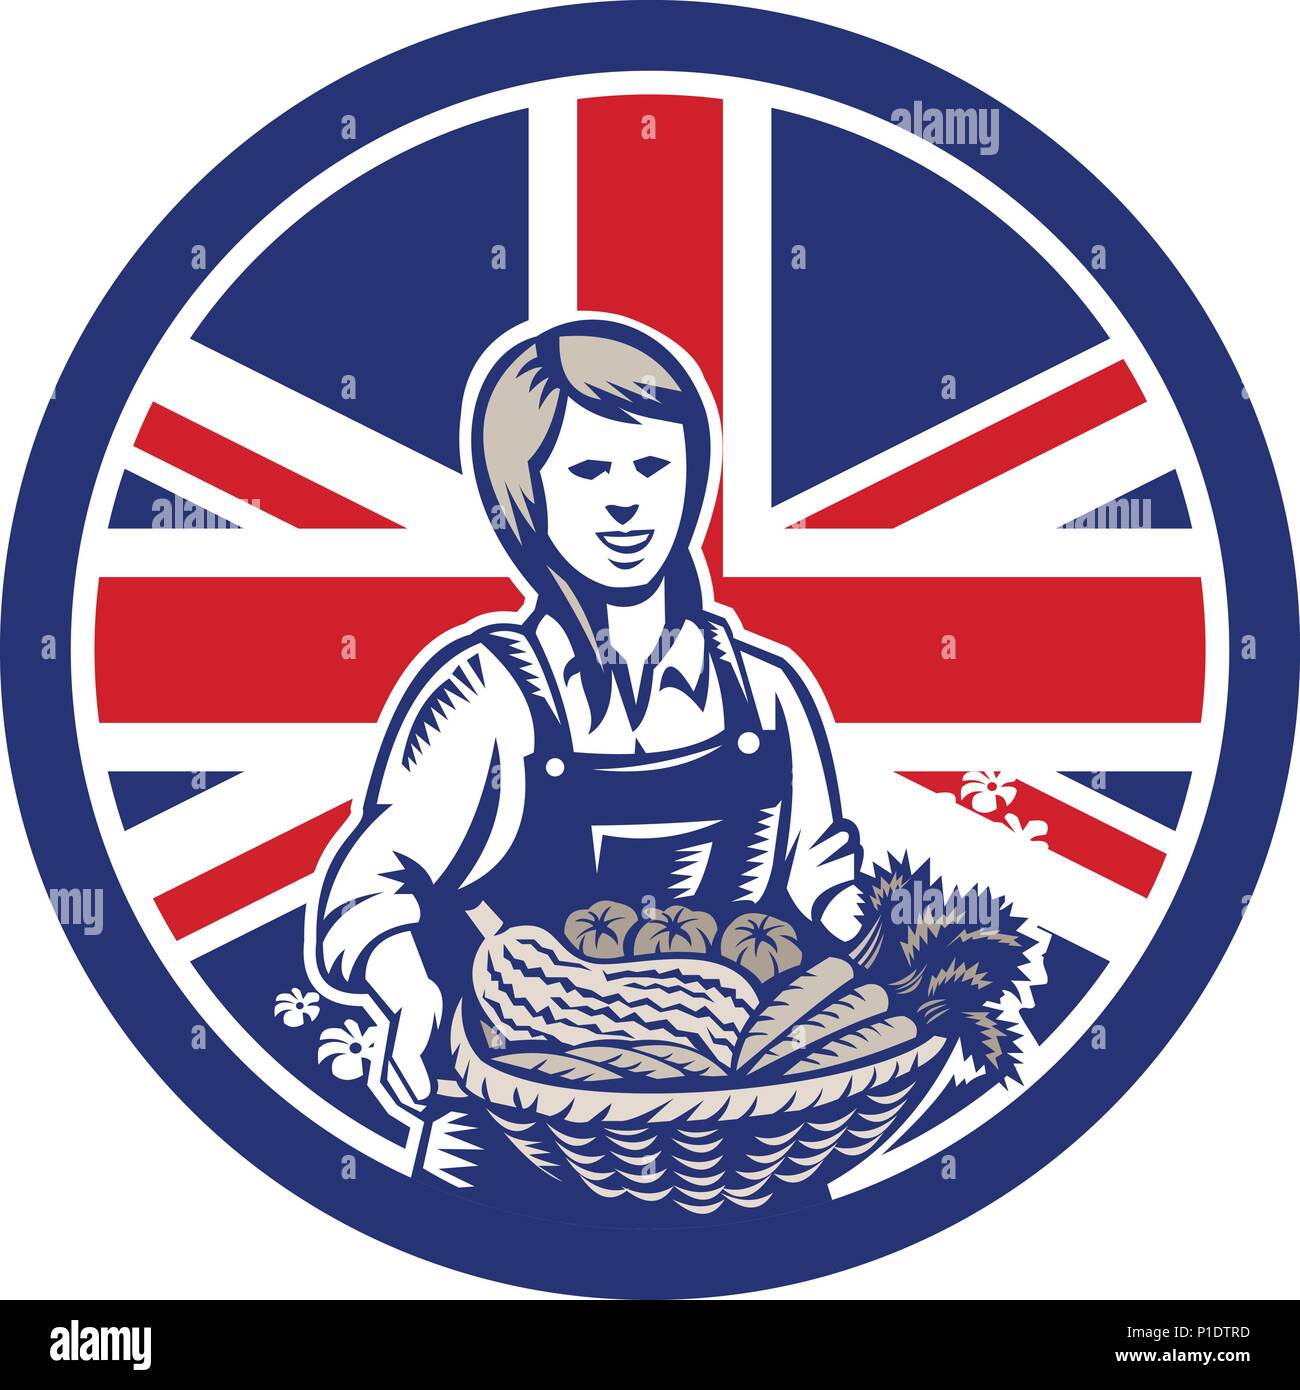 Icon retro style illustration of a British female organic farmer presenting crop harvest  with United Kingdom UK, Great Britain Union Jack flag set in Stock Vector